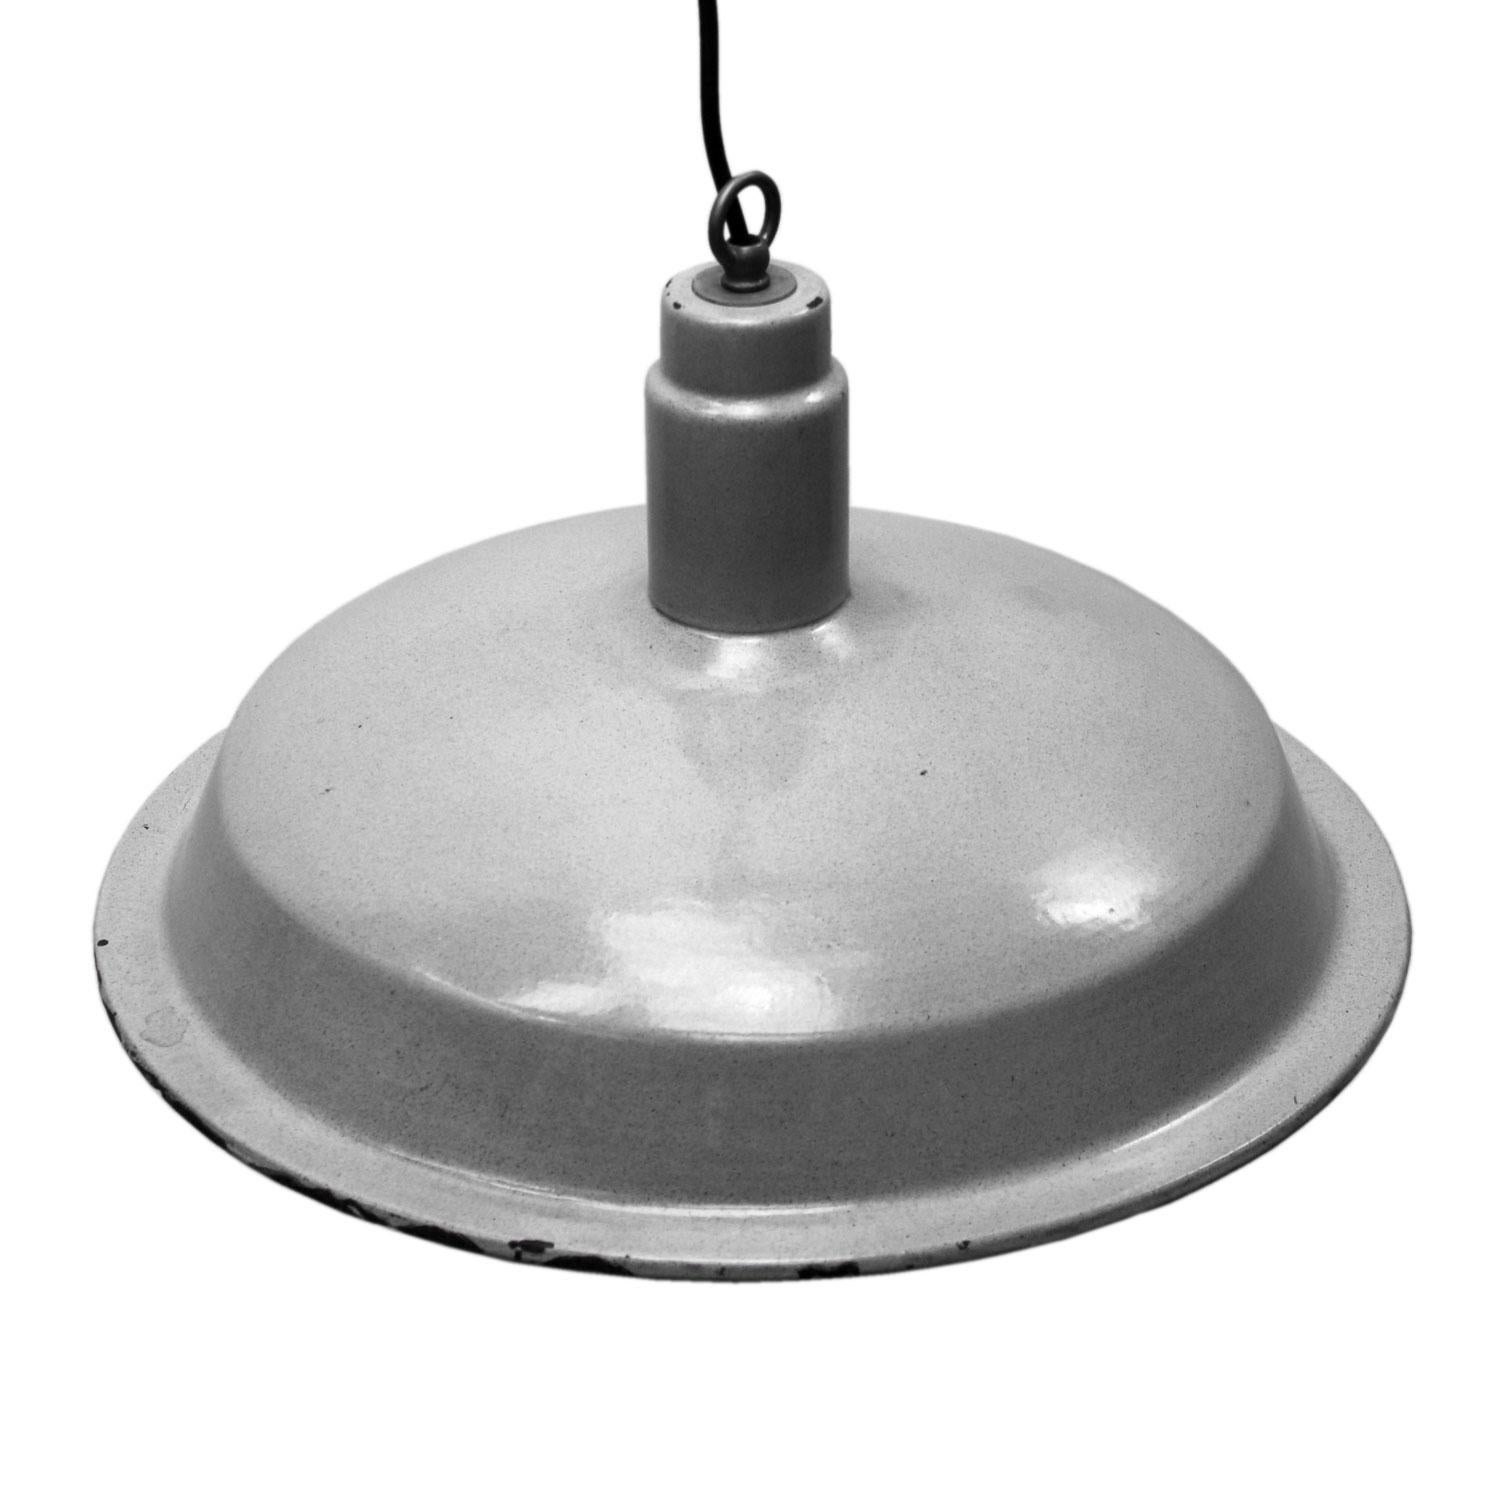 Industrial lamp. Gray enamel shade. White interior.

Weight: 2.0 kg / 4.4 lb

Priced per individual item. All lamps have been made suitable by international standards for incandescent light bulbs, energy-efficient and LED bulbs. E26/E27 bulb